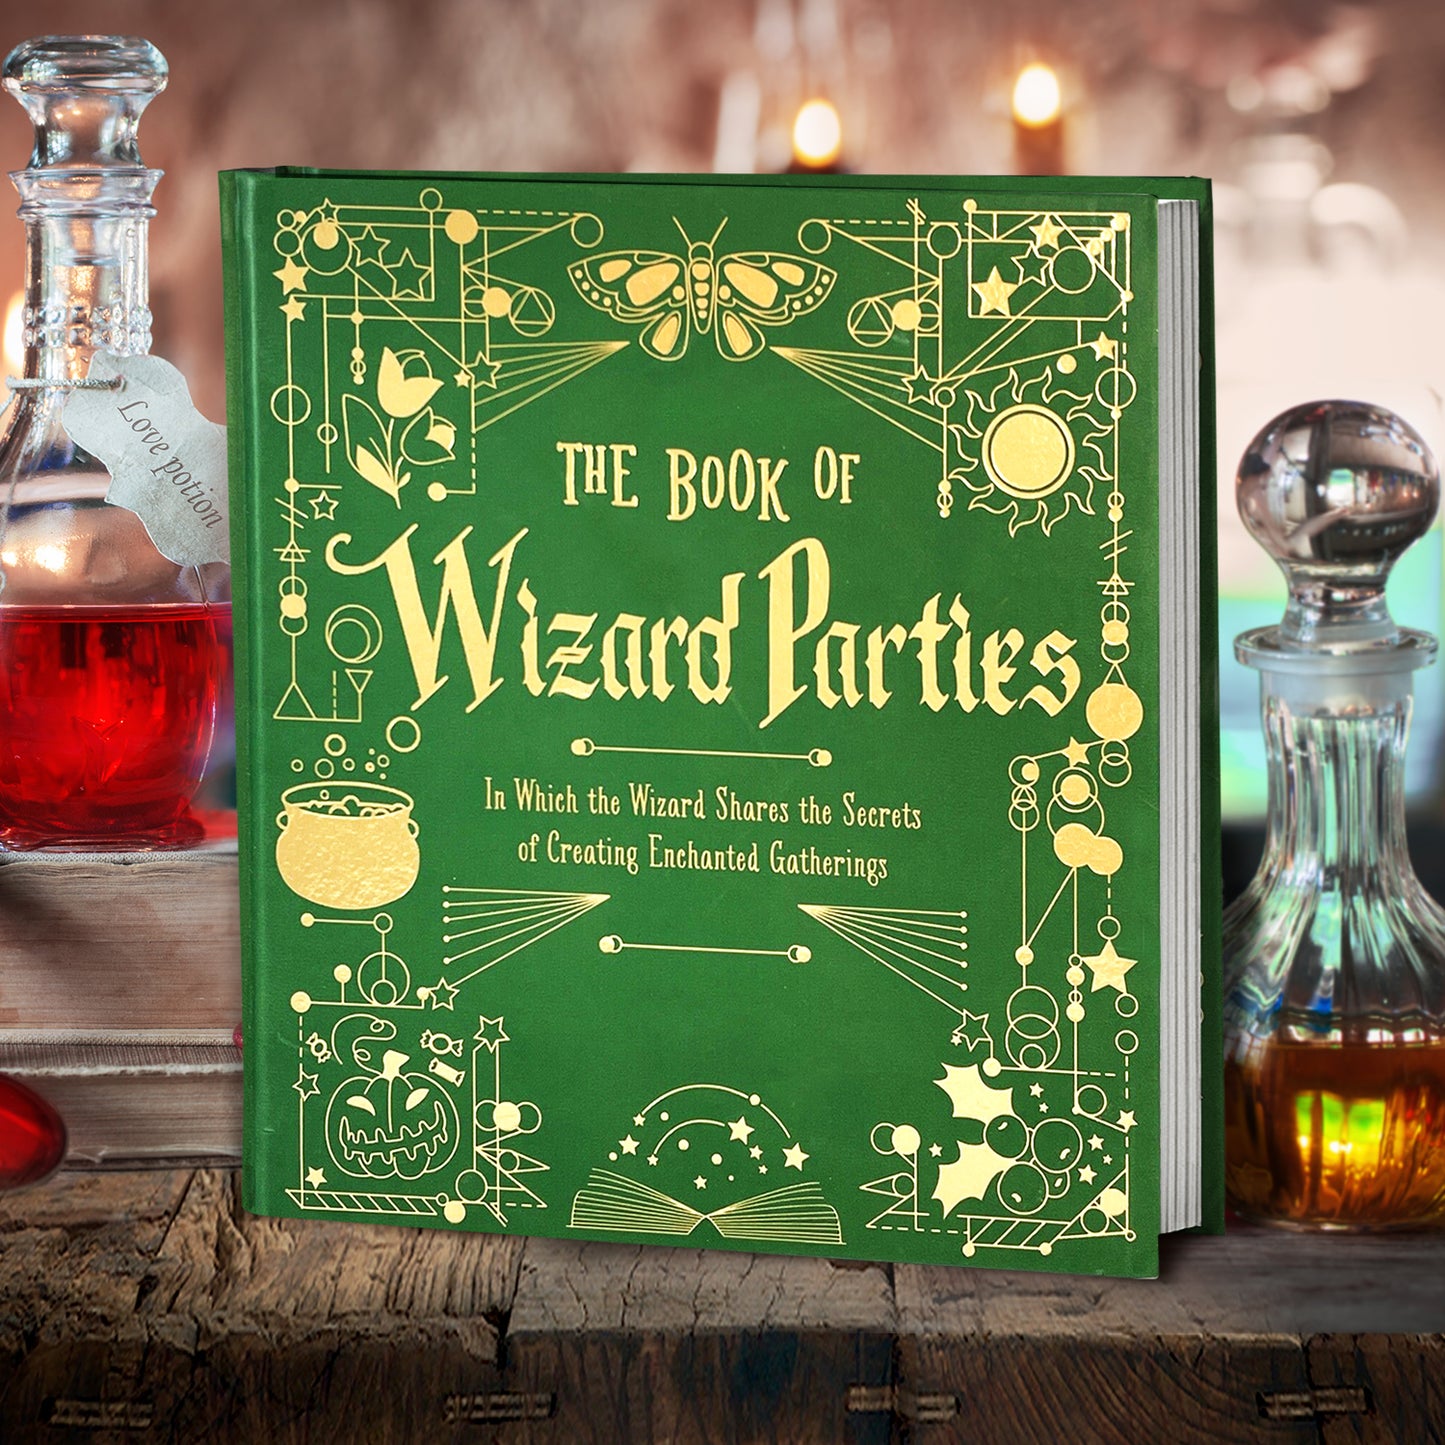 A green book on a wood table, next to crystal decanters filled with colorful potions. On the book's cover are yellow etchings of wizard and witch craft tools and spell ingredients. At the top in yellow text is "The Book of Wizard Parties: In Which the Wizard Shares the Secrets of Creating Enchanted Gatherings"